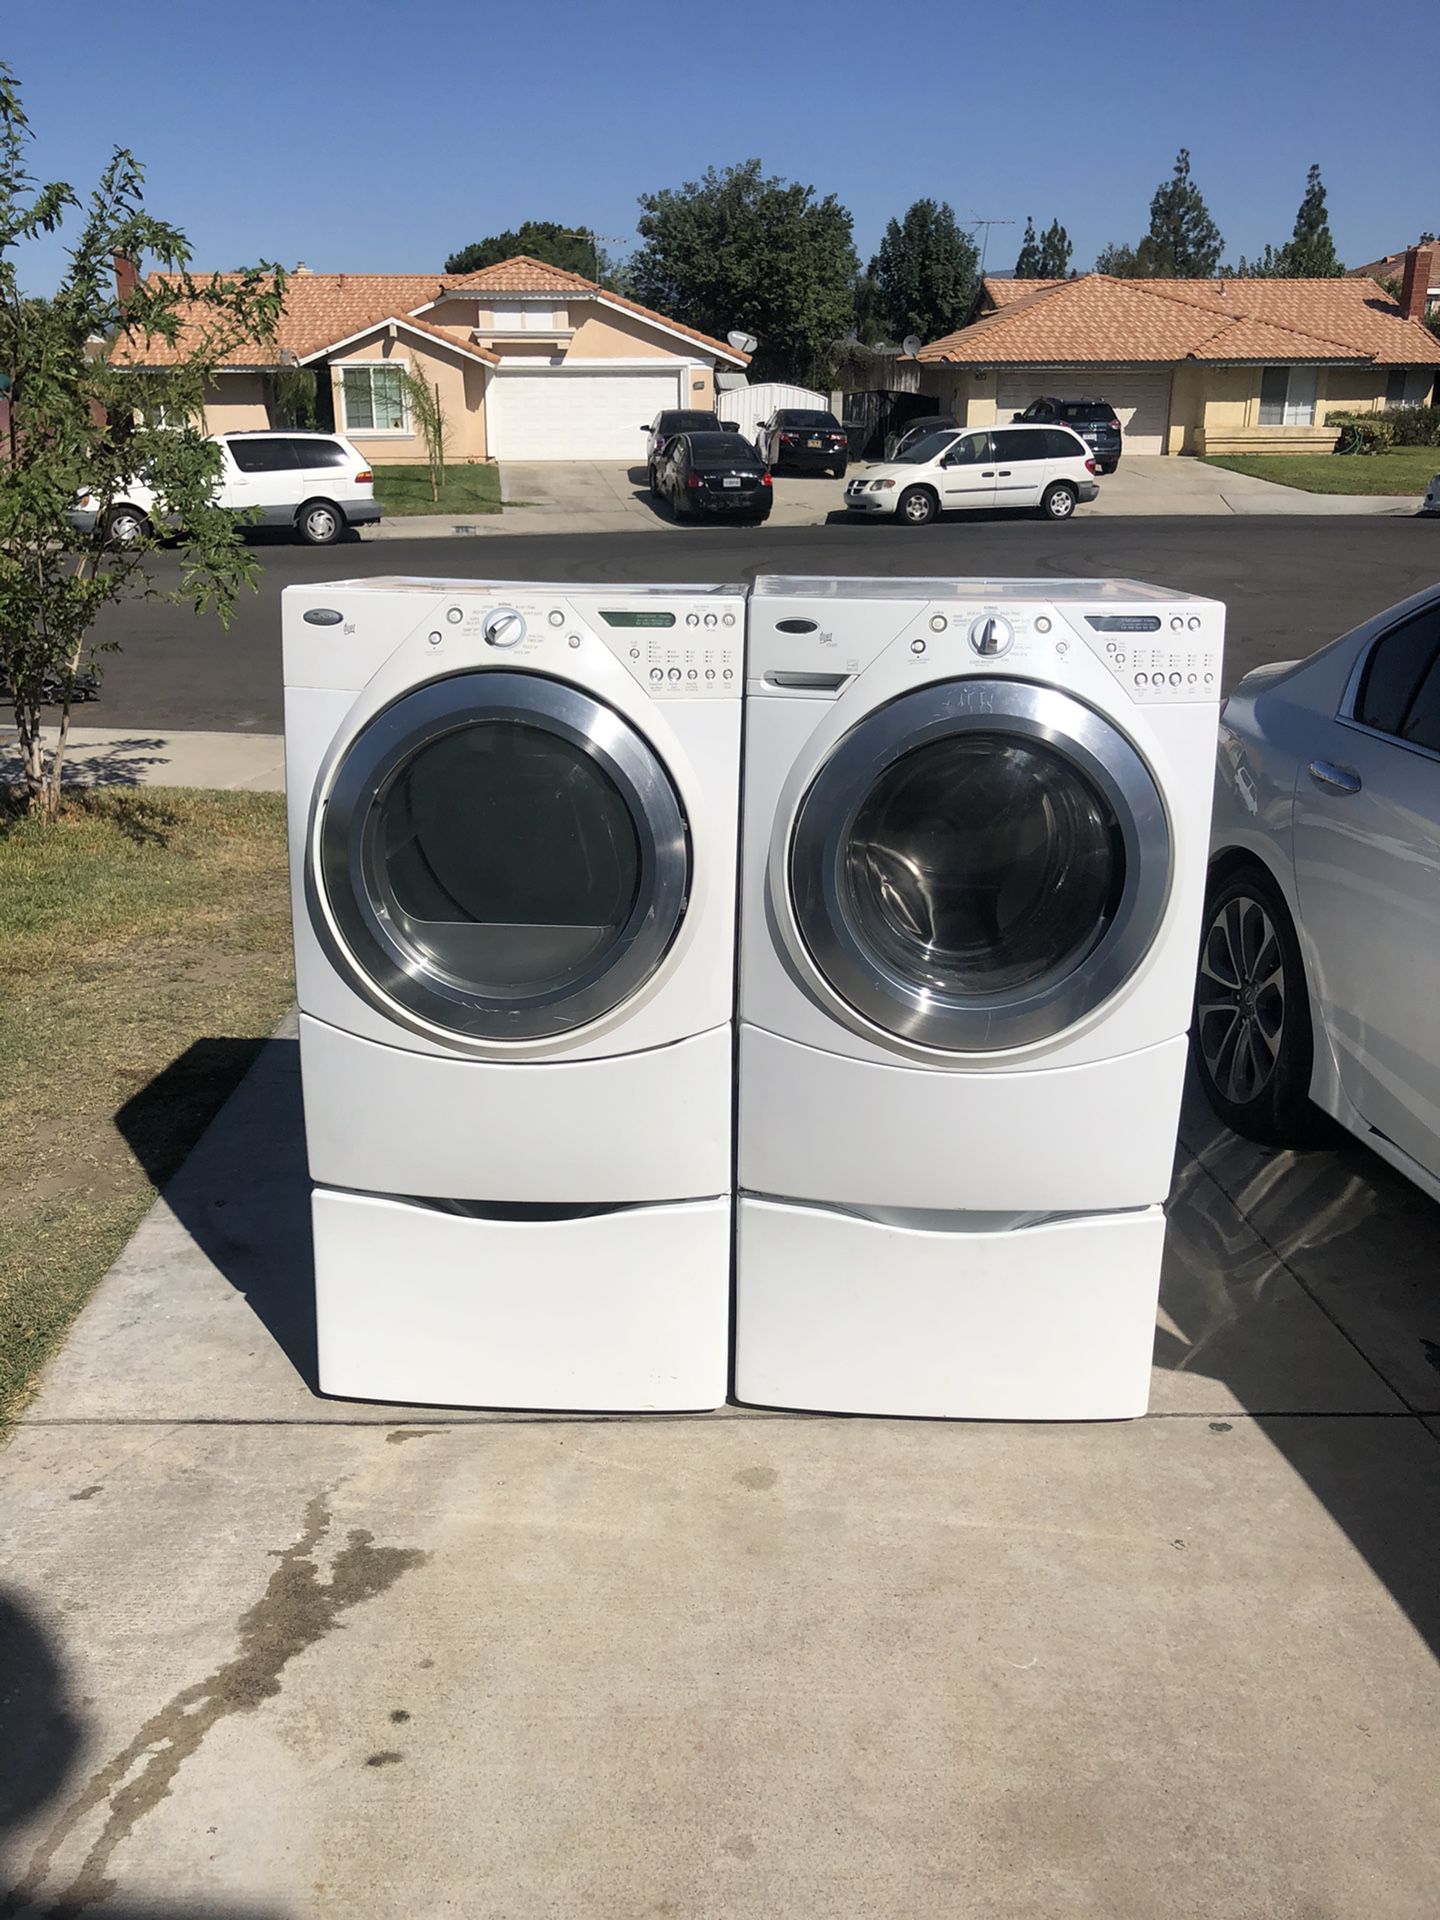 Whirlpool duet washer and dryer gas heavy duty super capacity plus smart wash good condition deliver and installation available